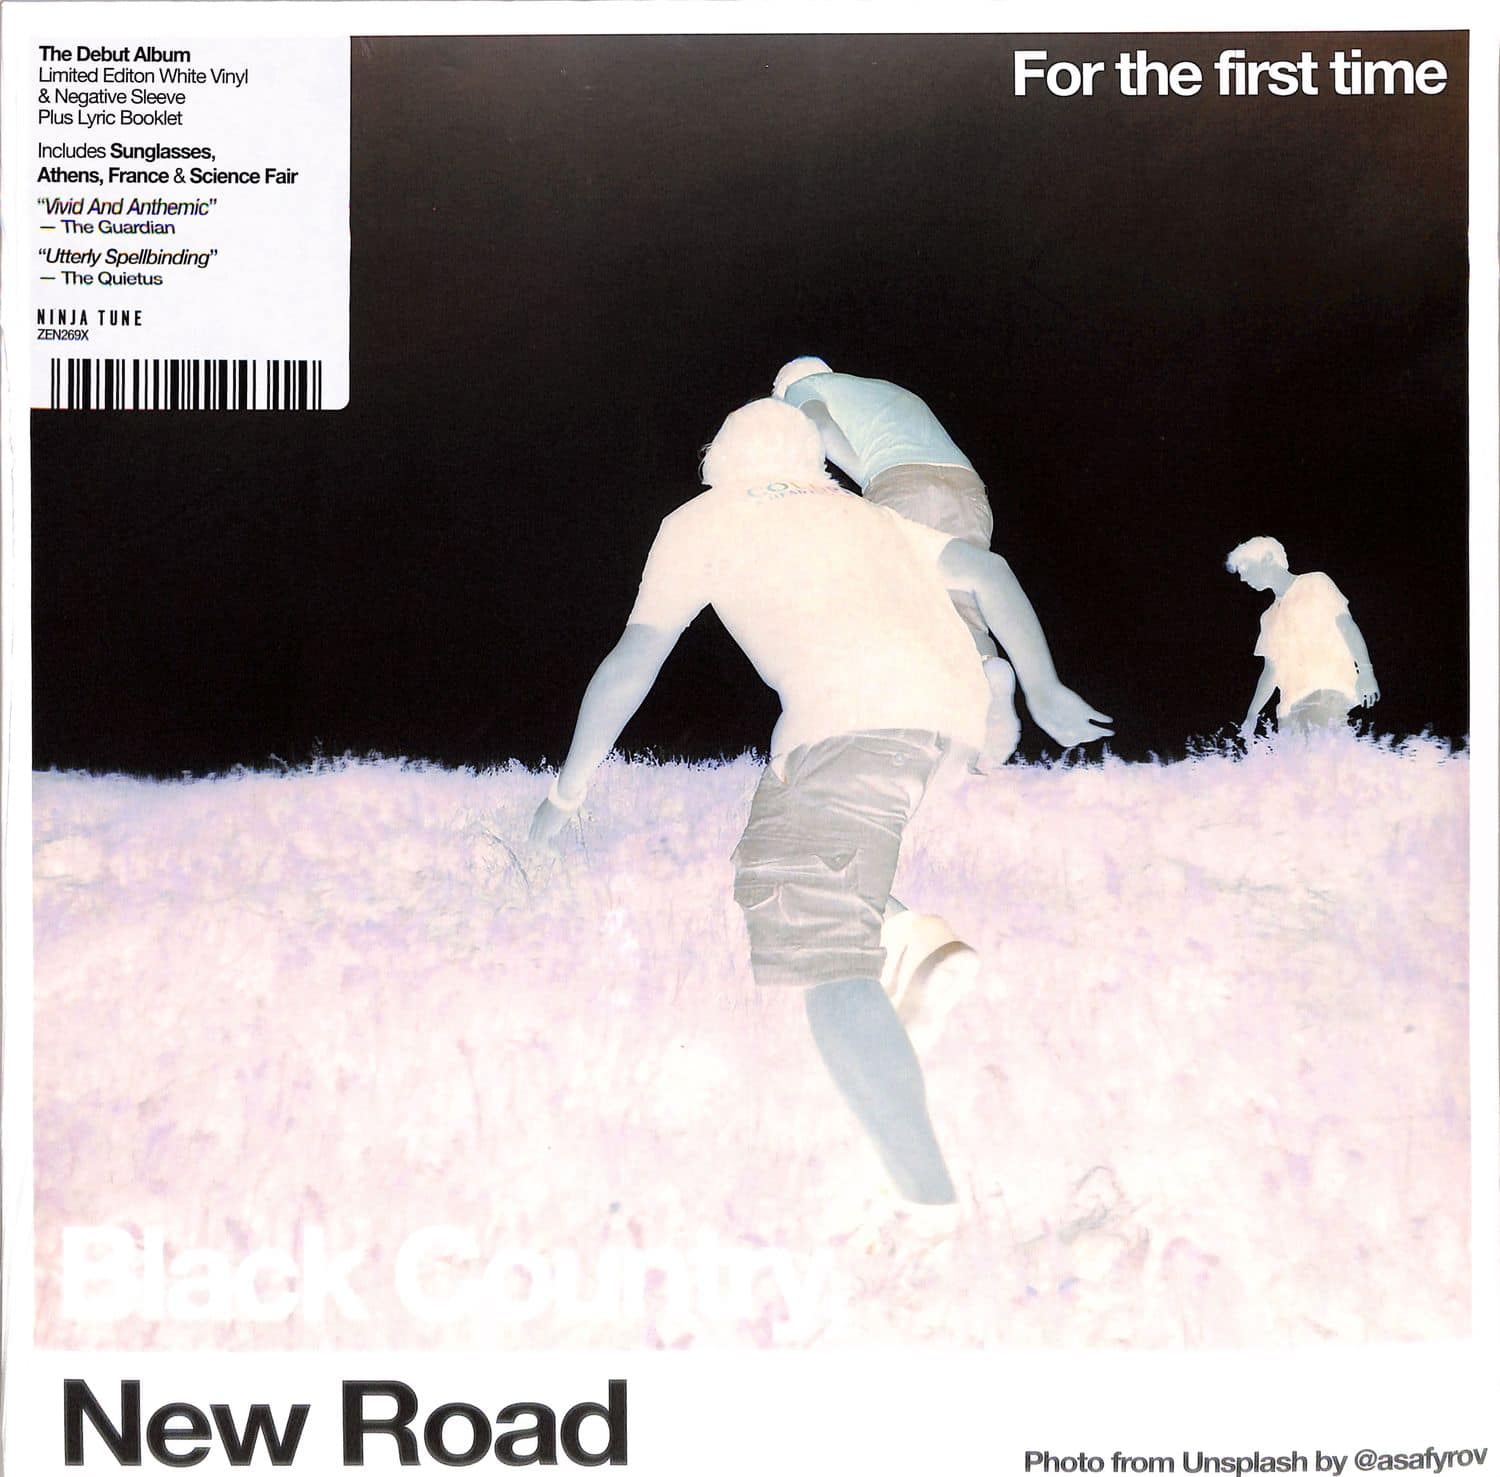 Black Country, New Road - FOR THE FIRST TIME 